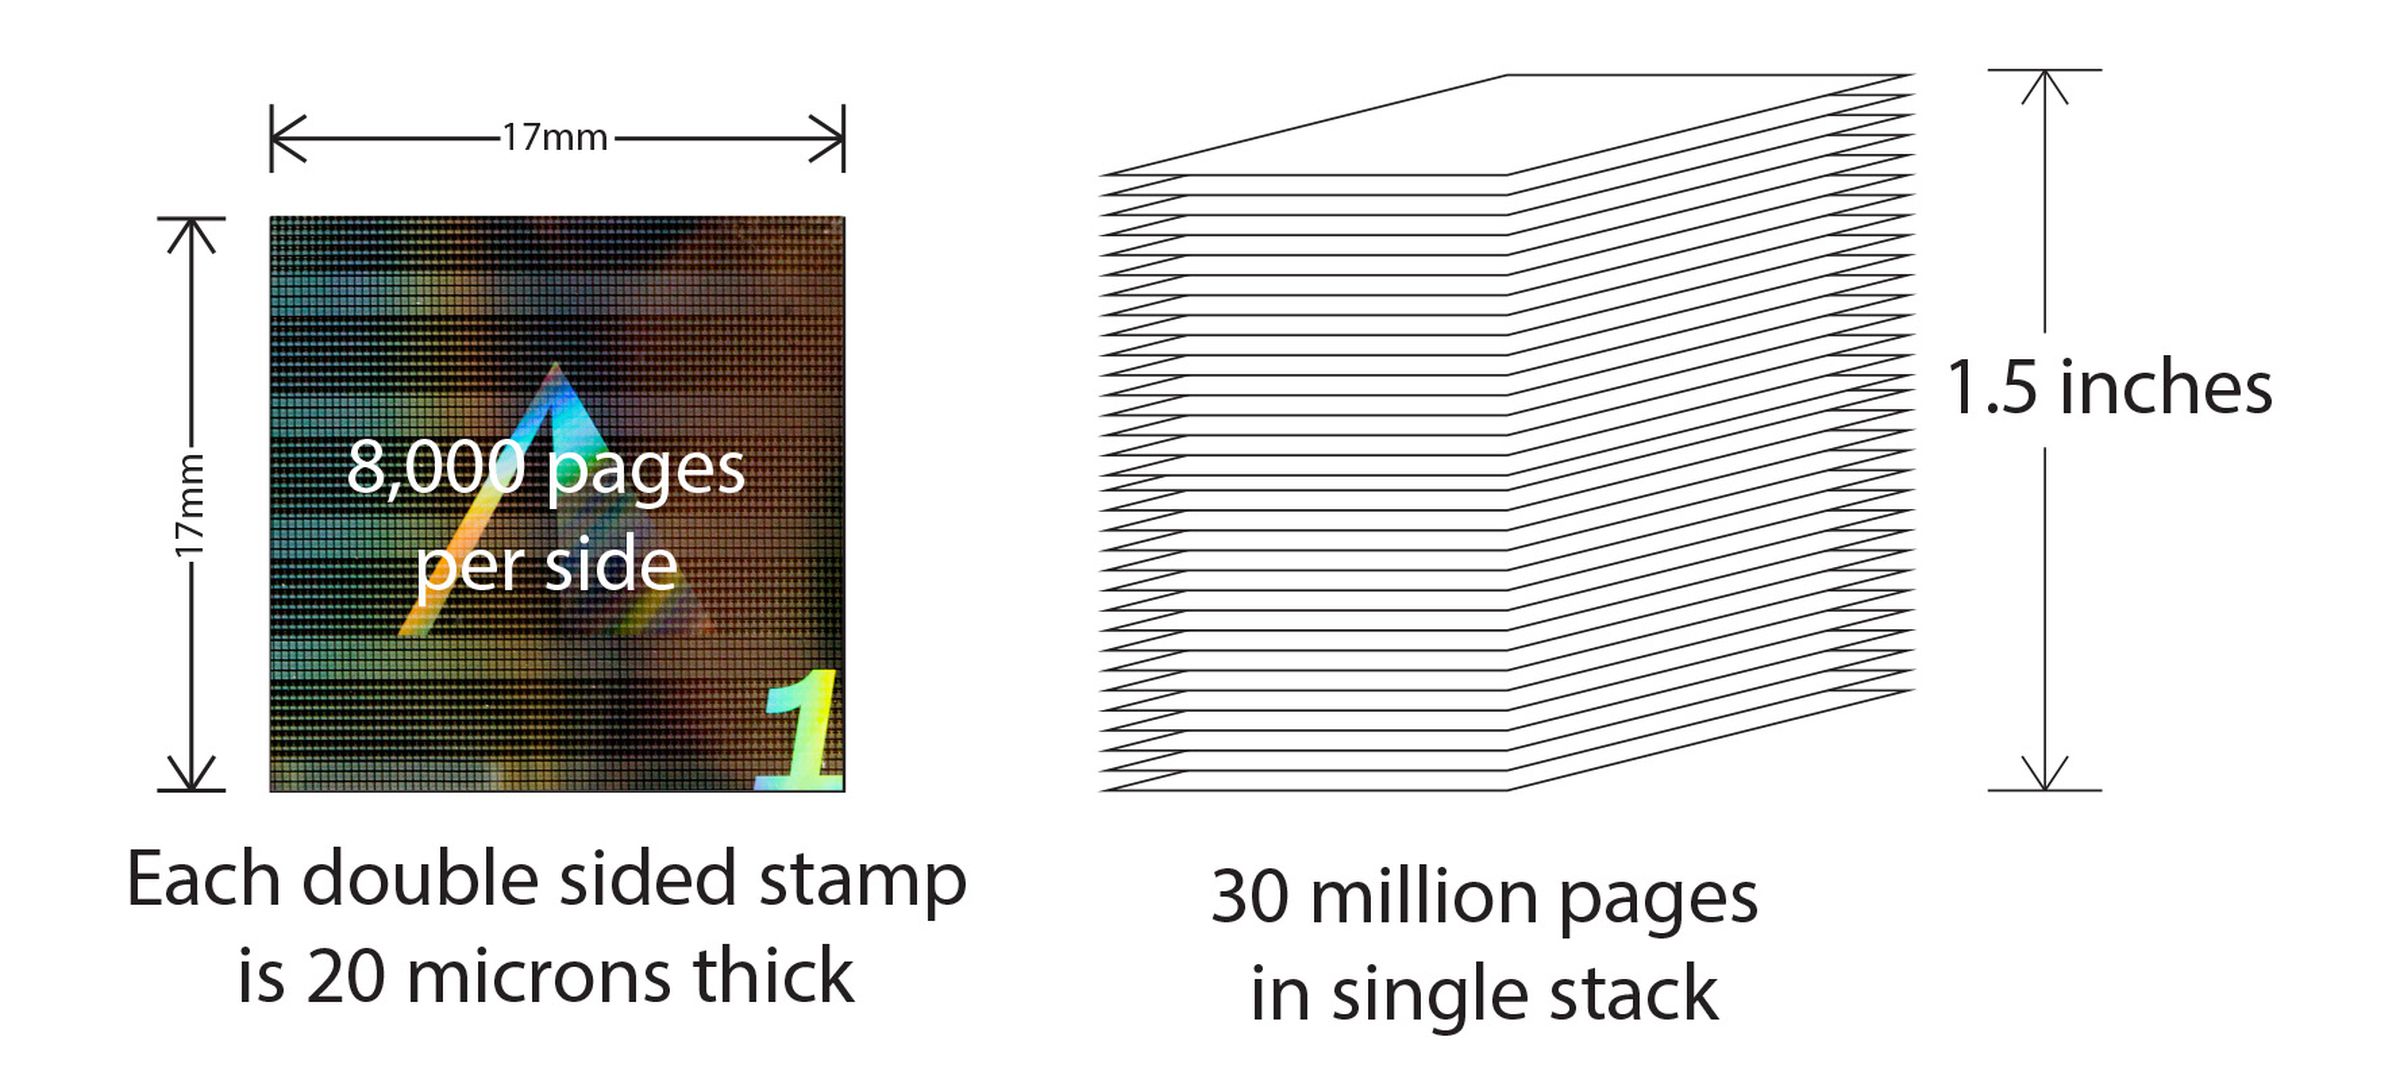 How millions of pages could be stored in a single stack of nickel sheets